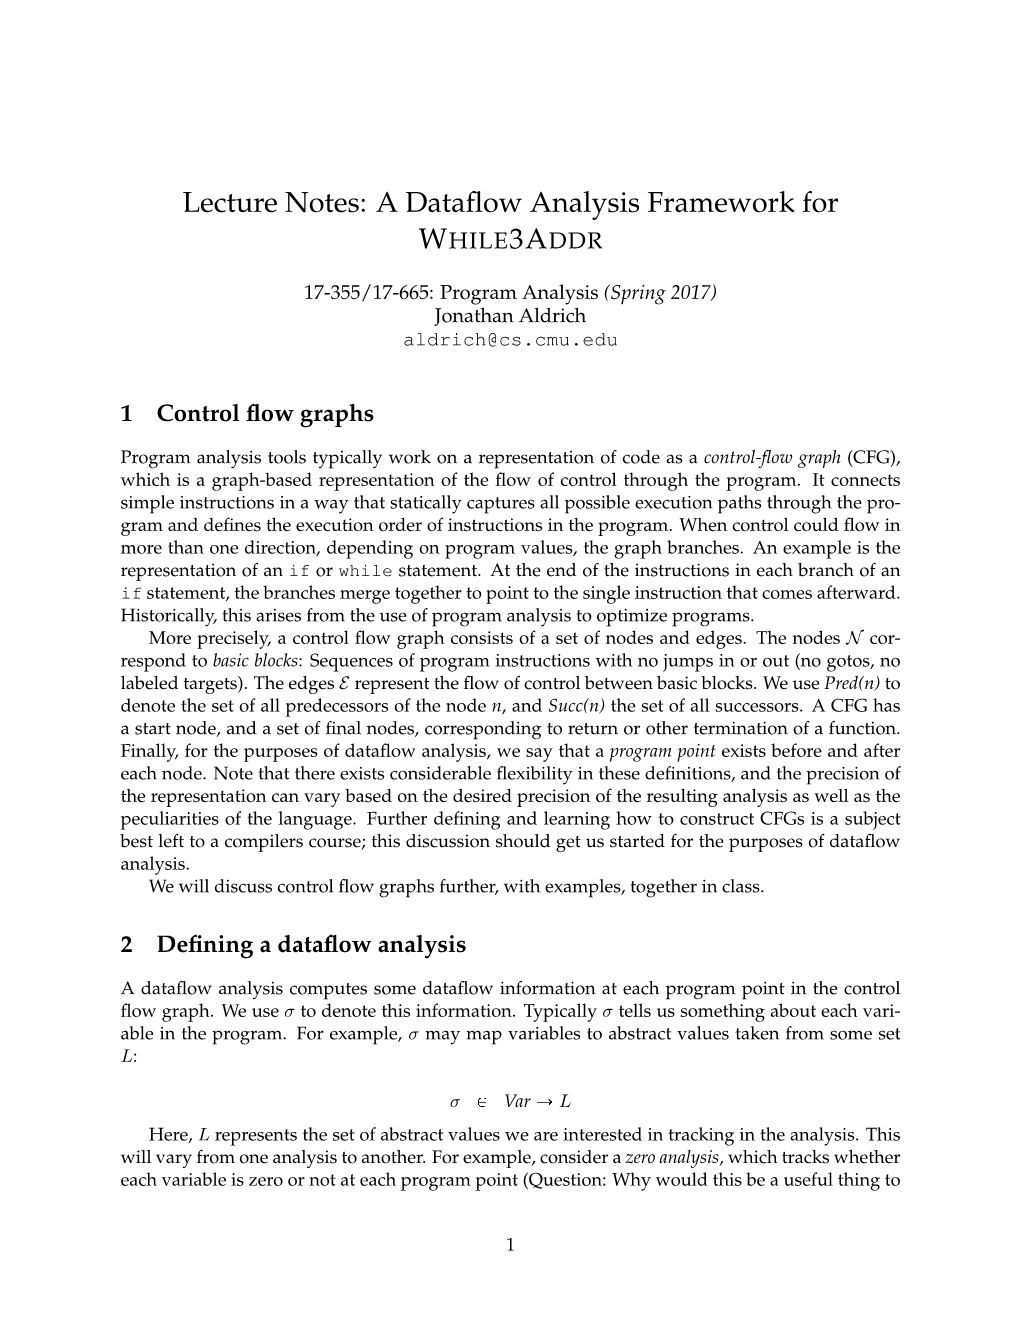 Lecture Notes: a Dataflow Analysis Framework